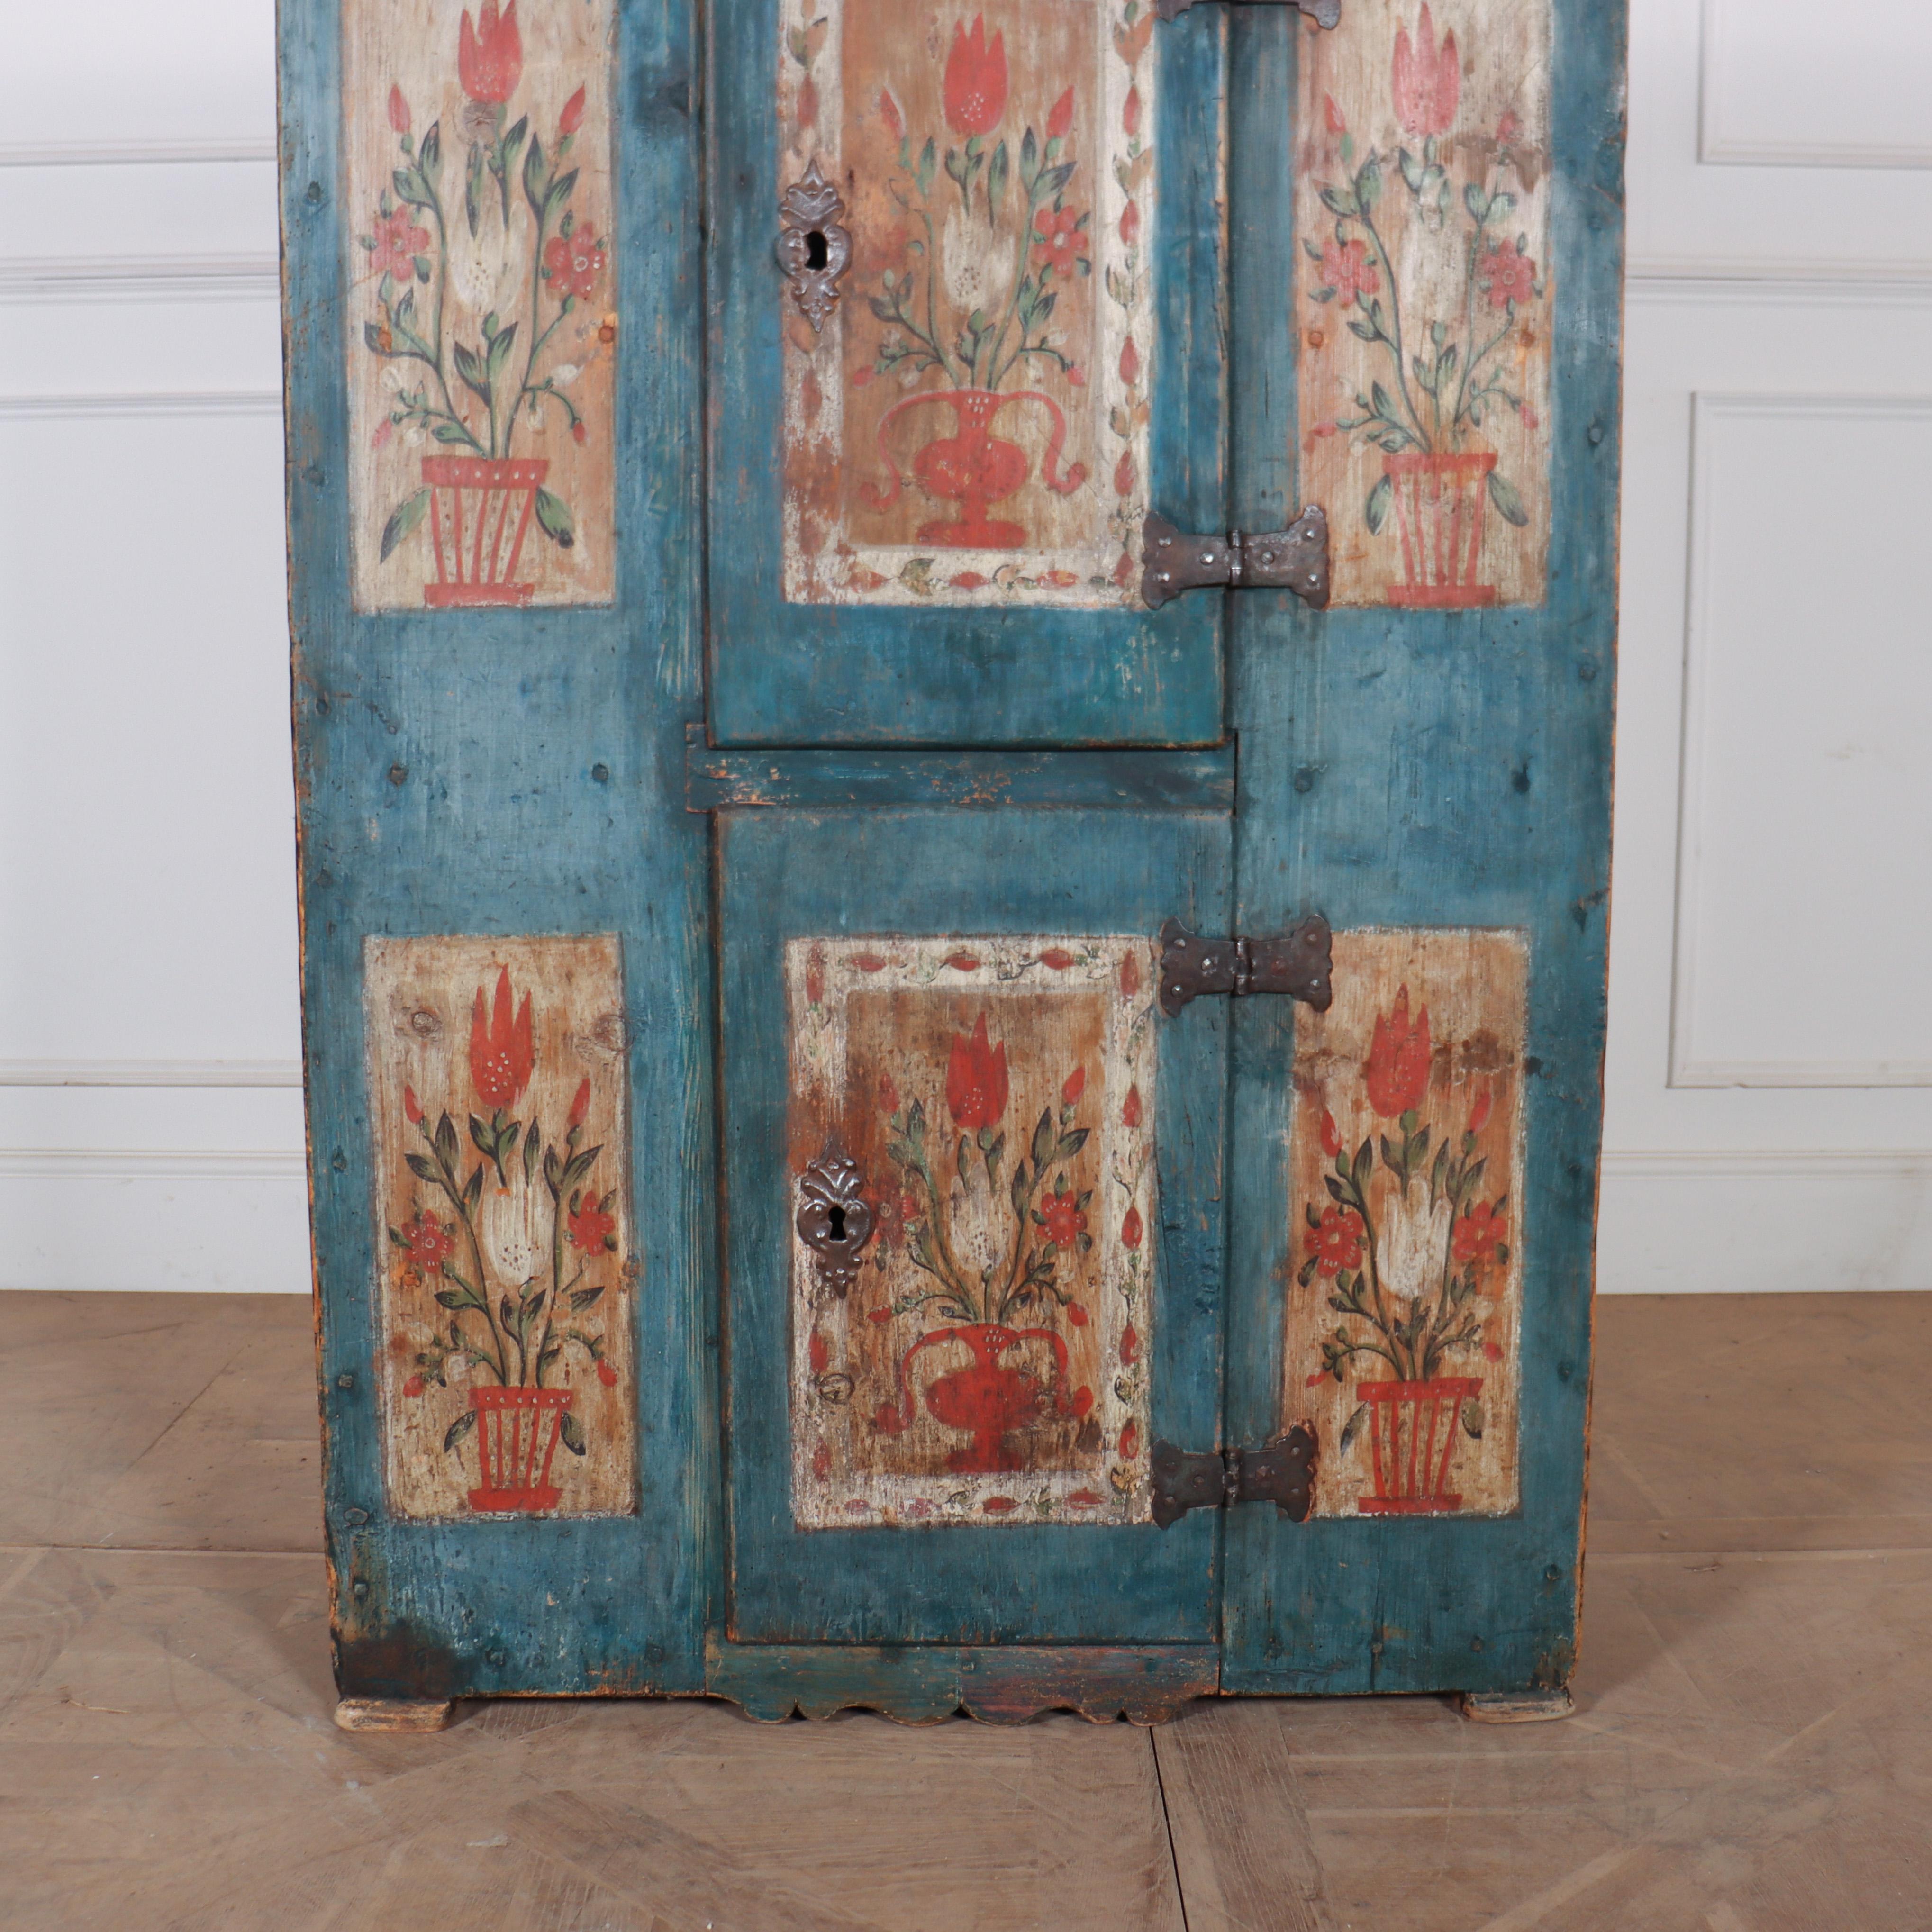 Small 18th C Austrian folk painted pine storage cupboard. 1790.

Reference: 7976

Dimensions
40 inches (102 cms) Wide
16 inches (41 cms) Deep
56 inches (142 cms) High